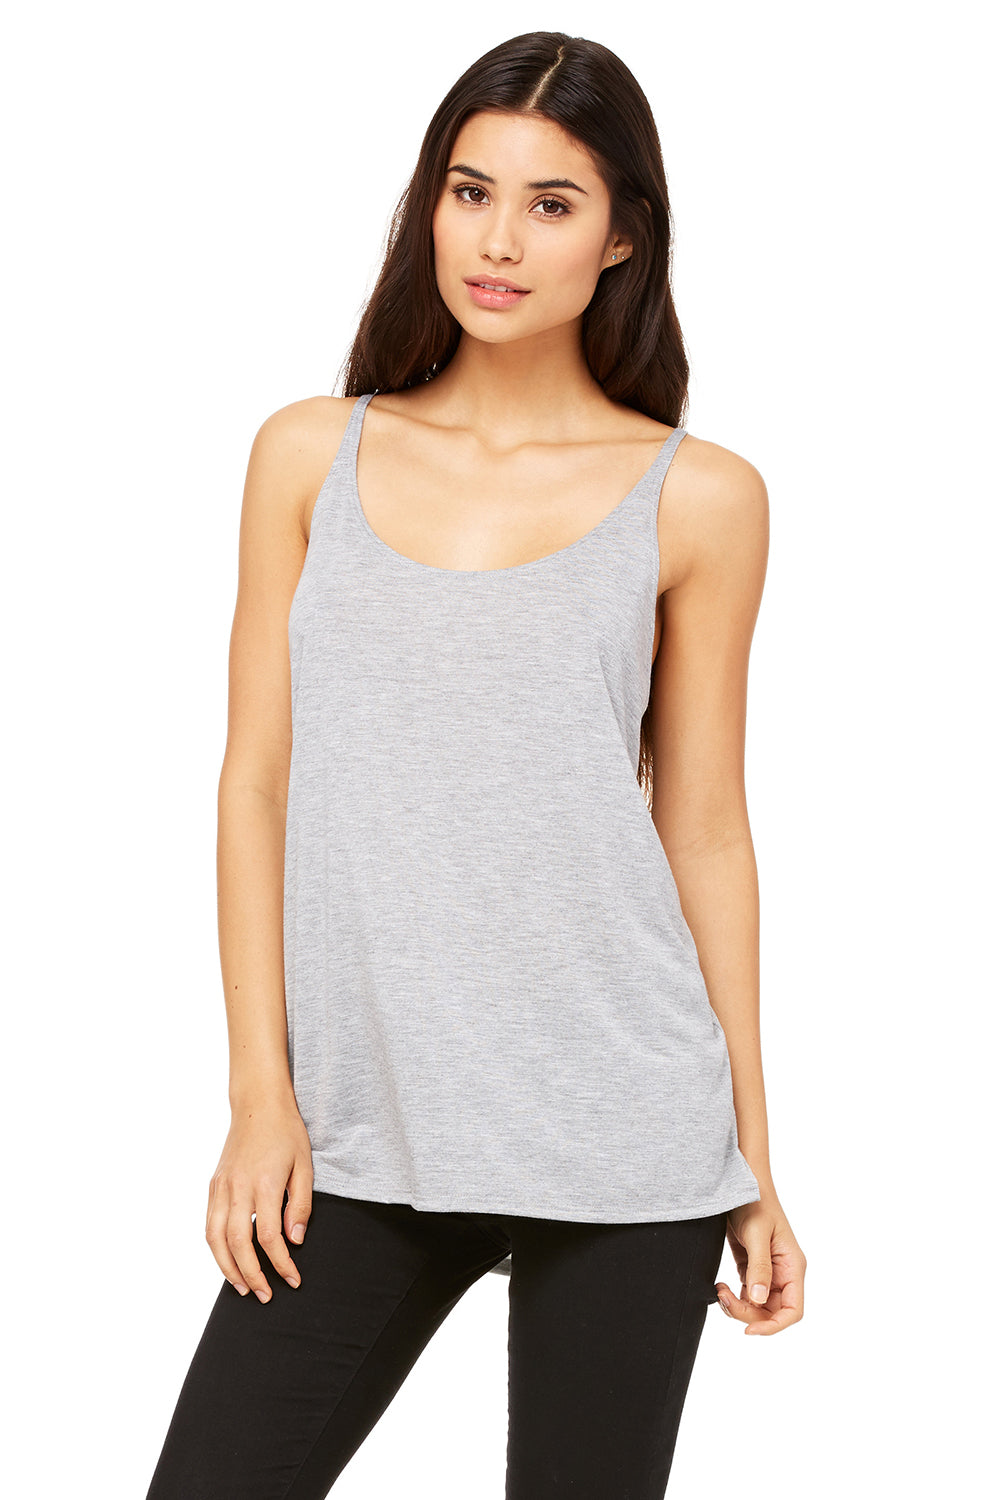 Bella + Canvas 8838 Womens Slouchy Tank Top Heather Grey Front